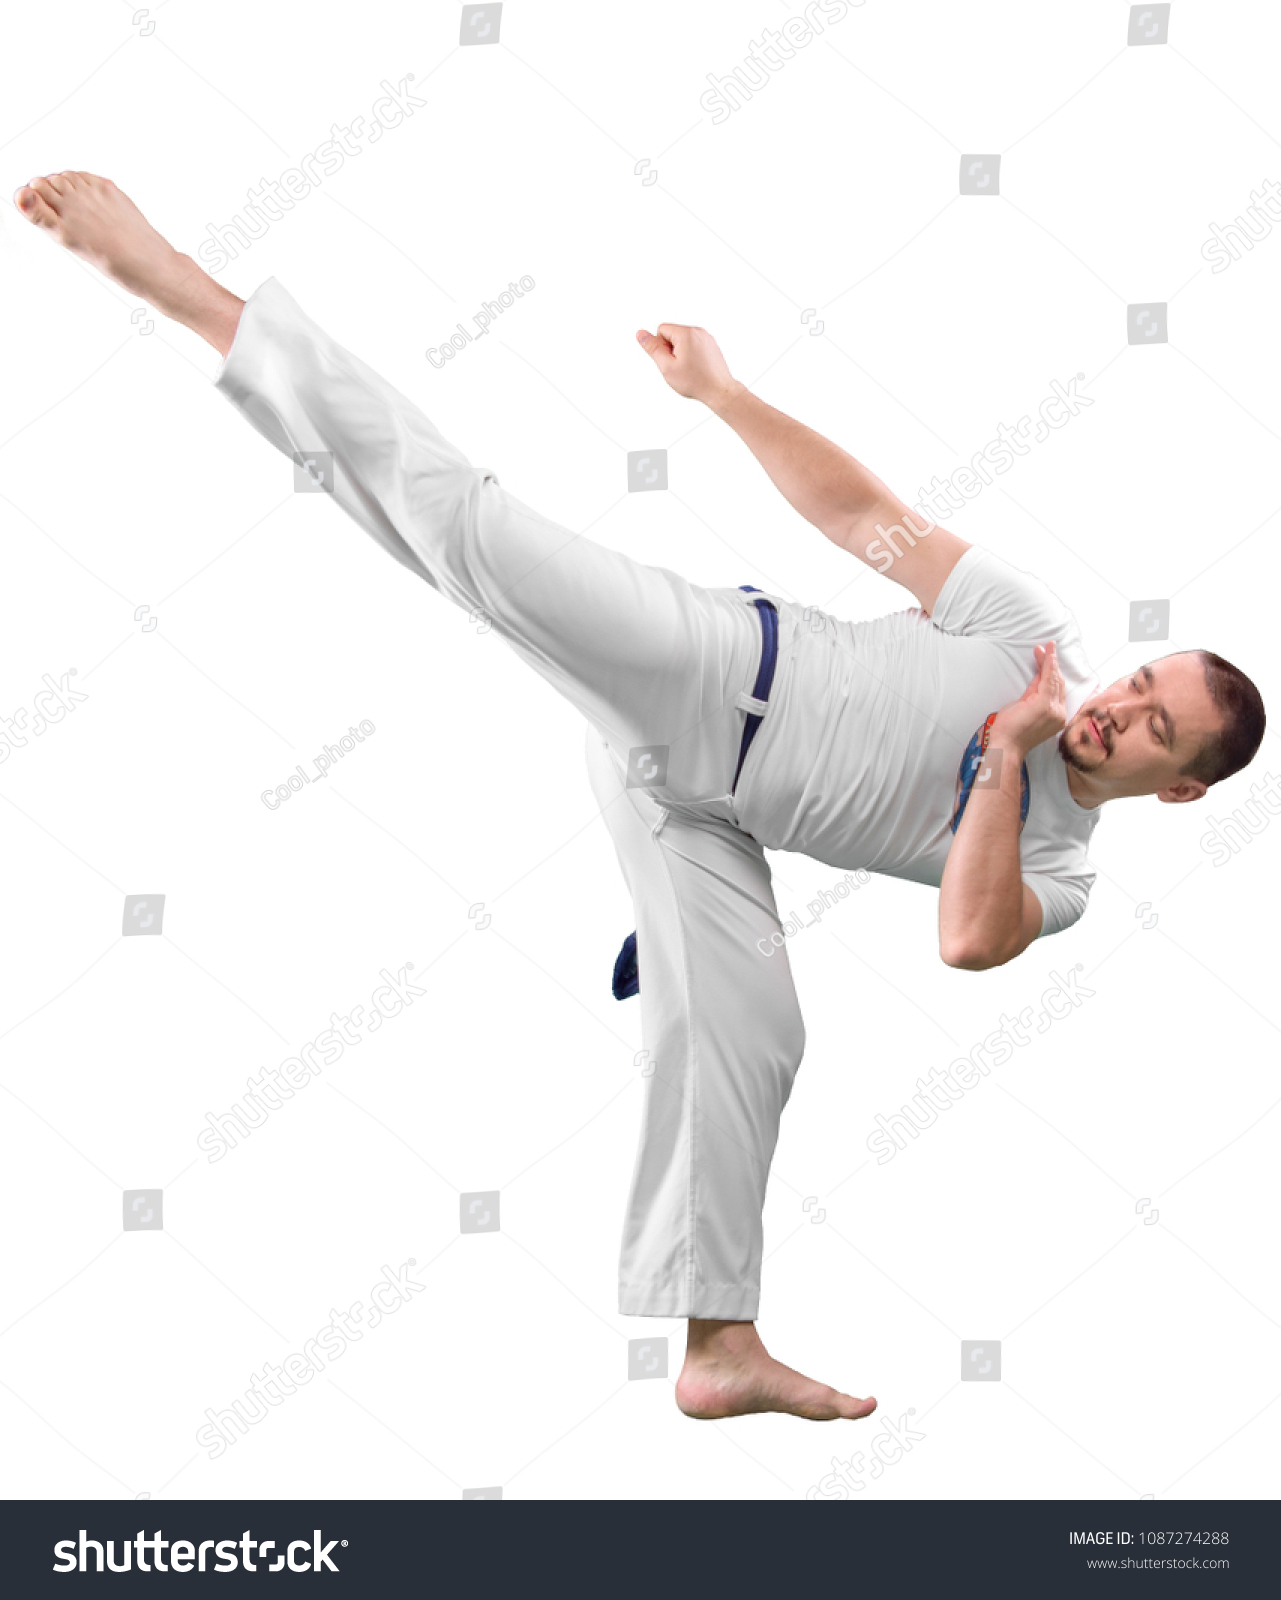 Man trains capoeira in studio isolated on white background. The man does the fighting element of capoeira. #1087274288